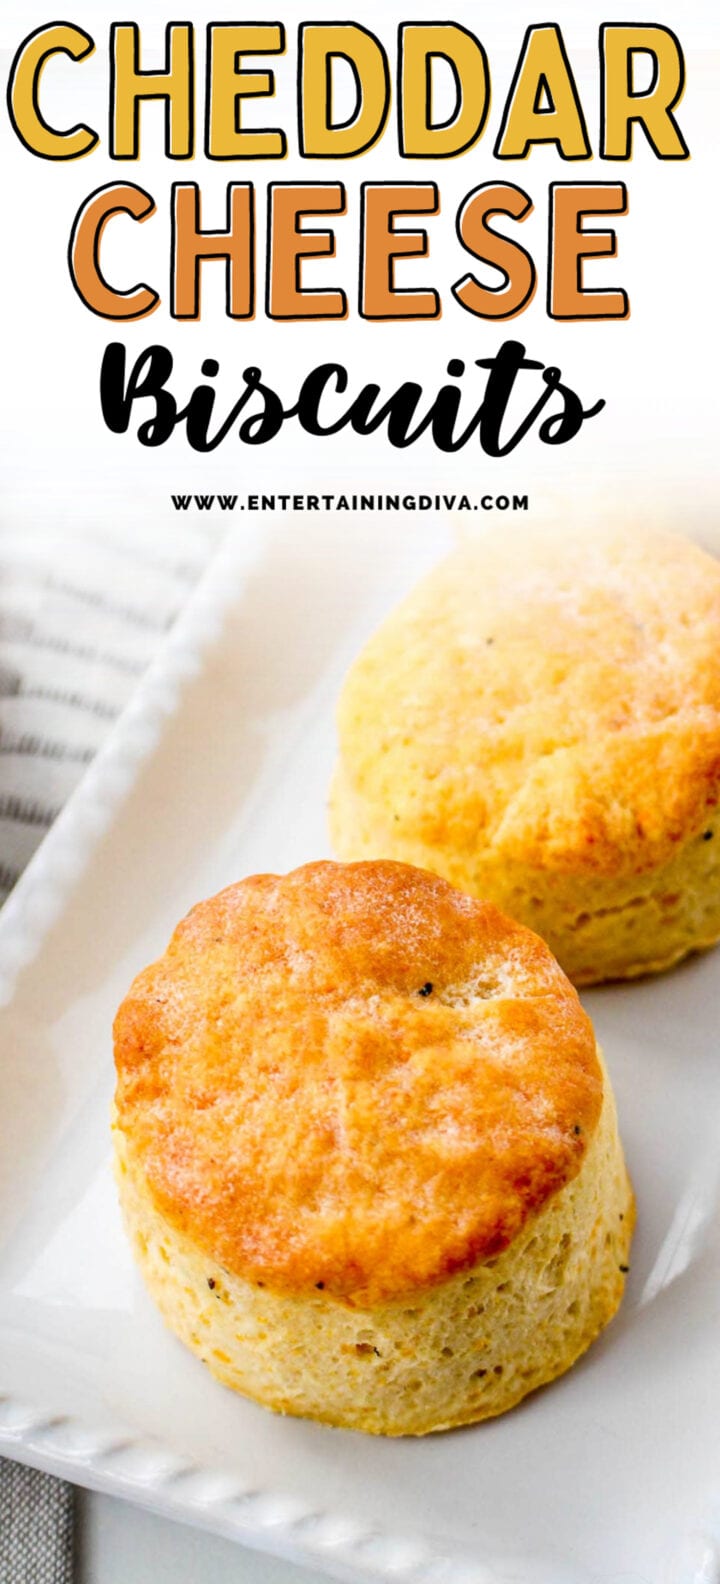 Easy Cheddar Cheese Biscuits (Only 4 Ingredients)